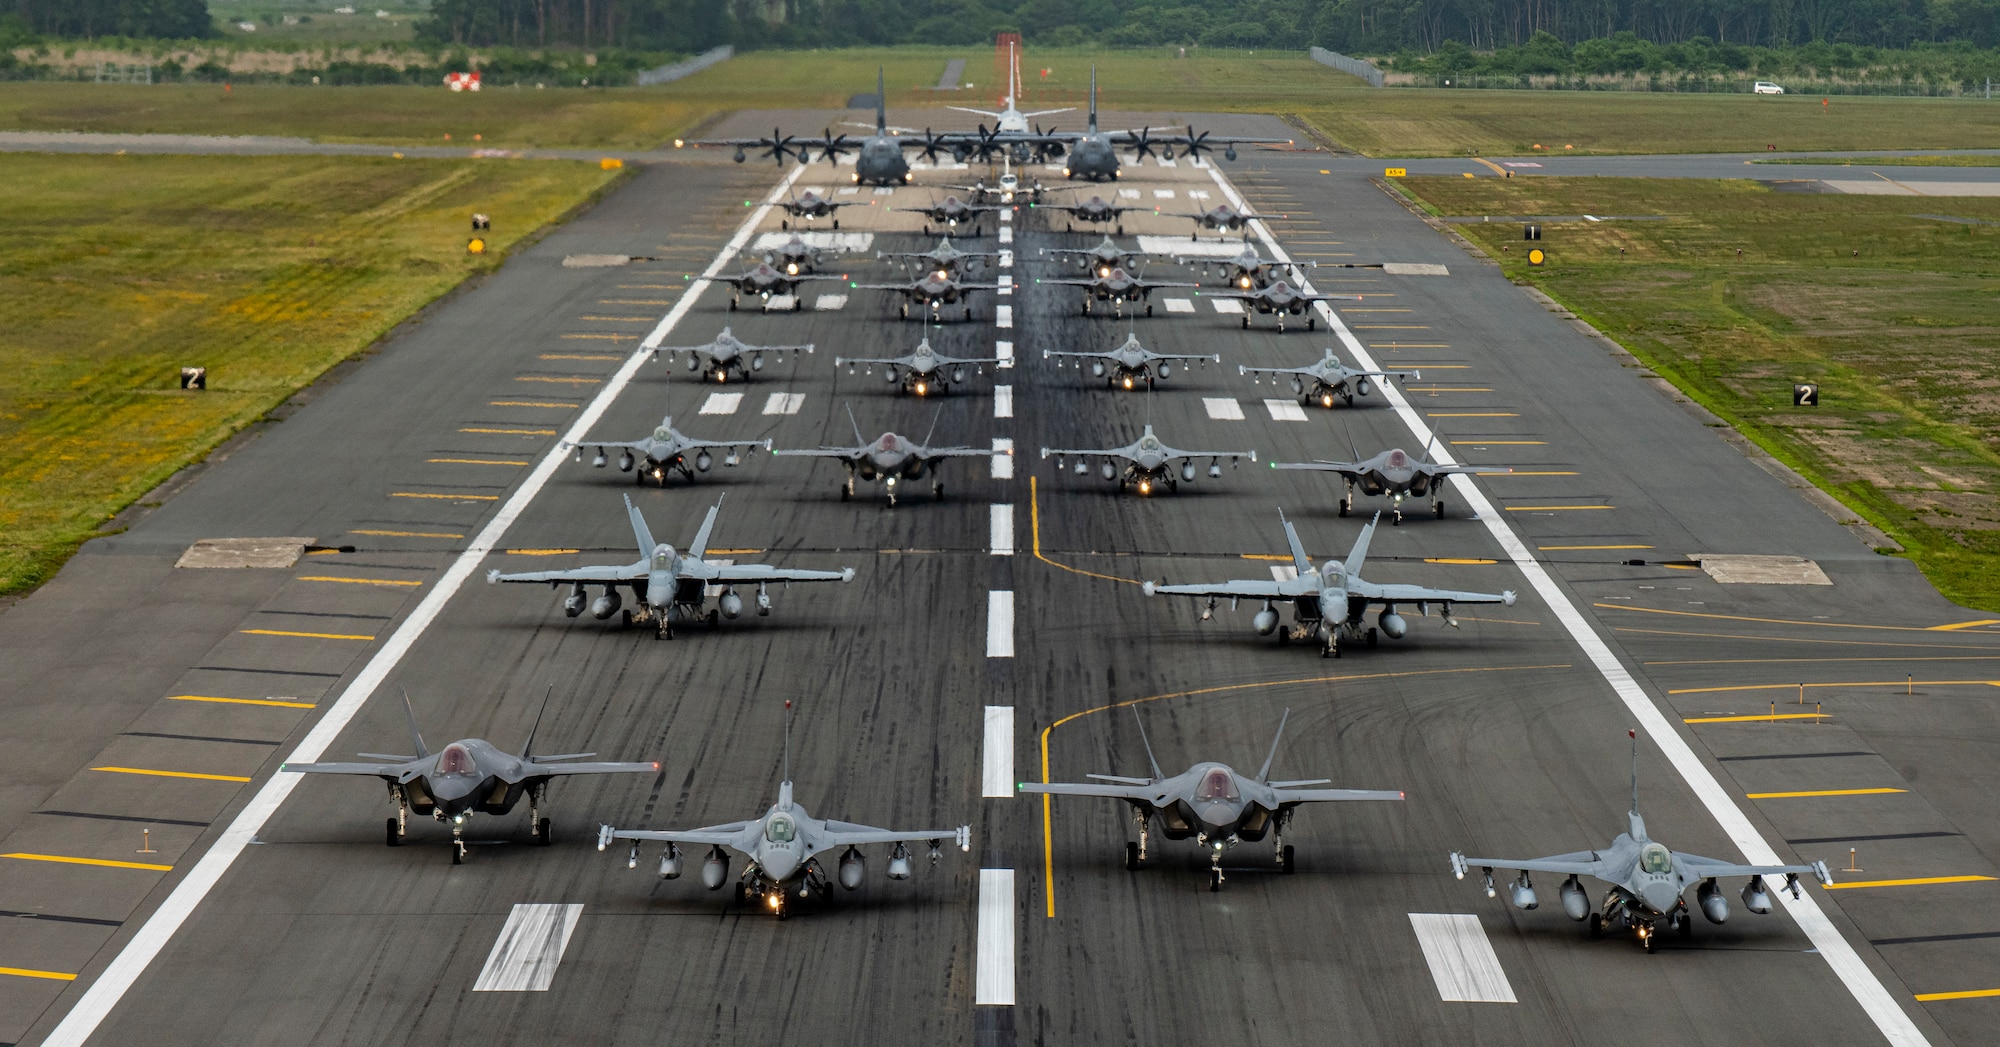 Twelve U.S. Air Force F-16CM Fighting Falcons, 12 Koku-Jieitai F-35A Lightning II Joint Strike Fighters, two U.S. Navy EA-18G Growlers, a USN C-12 Huron, two USAF MC-130J Commando II aircraft, and a USN P-8 Poseidon participate in an “Elephant Walk” at Misawa Air Base, June 22, 2020. The Elephant Walk showcased Misawa Air Base’s collective readiness and ability to generate combat airpower at a moment's notice to ensure regional stability throughout the Indo-Pacific. This is Misawa Air Base’s first time hosting a bilateral and joint Elephant Walk.